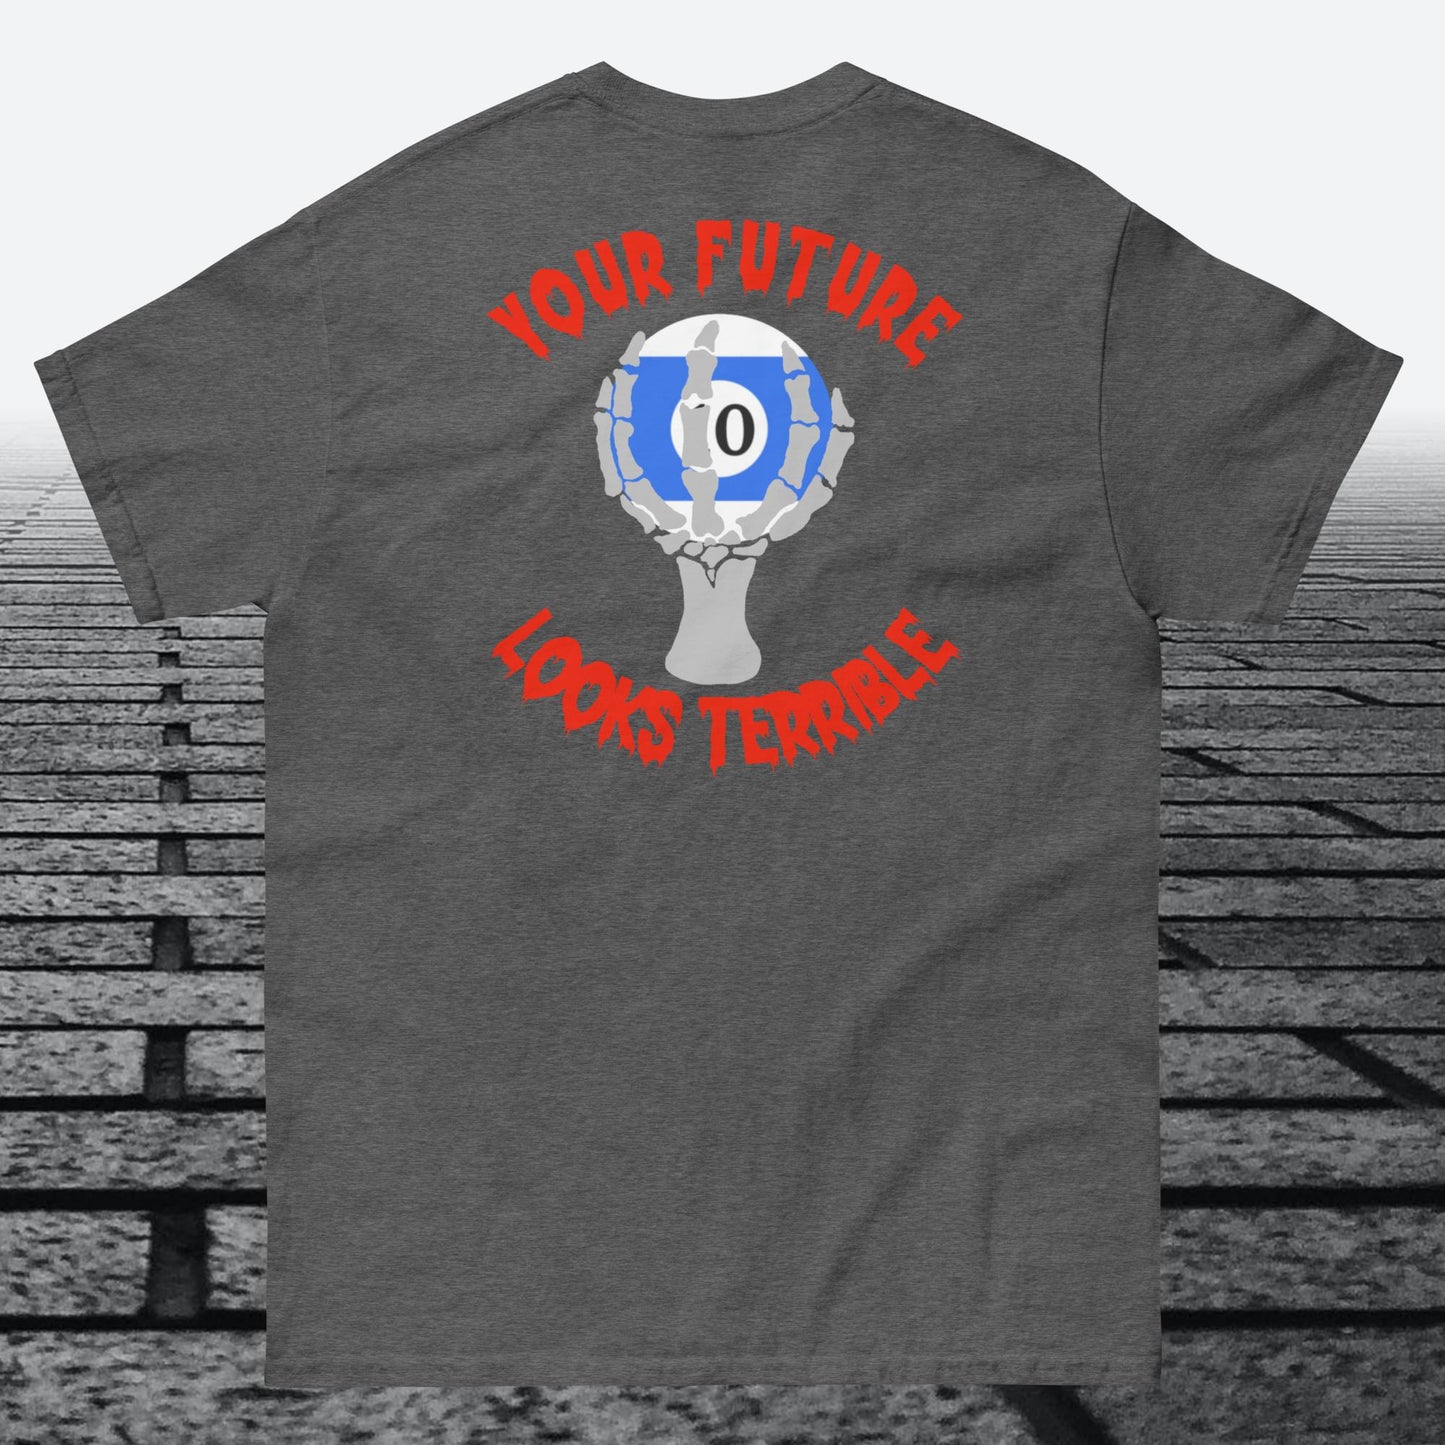 Your Future Looks Terrible with 10 ball, with logo on the front, Cotton t-shirt